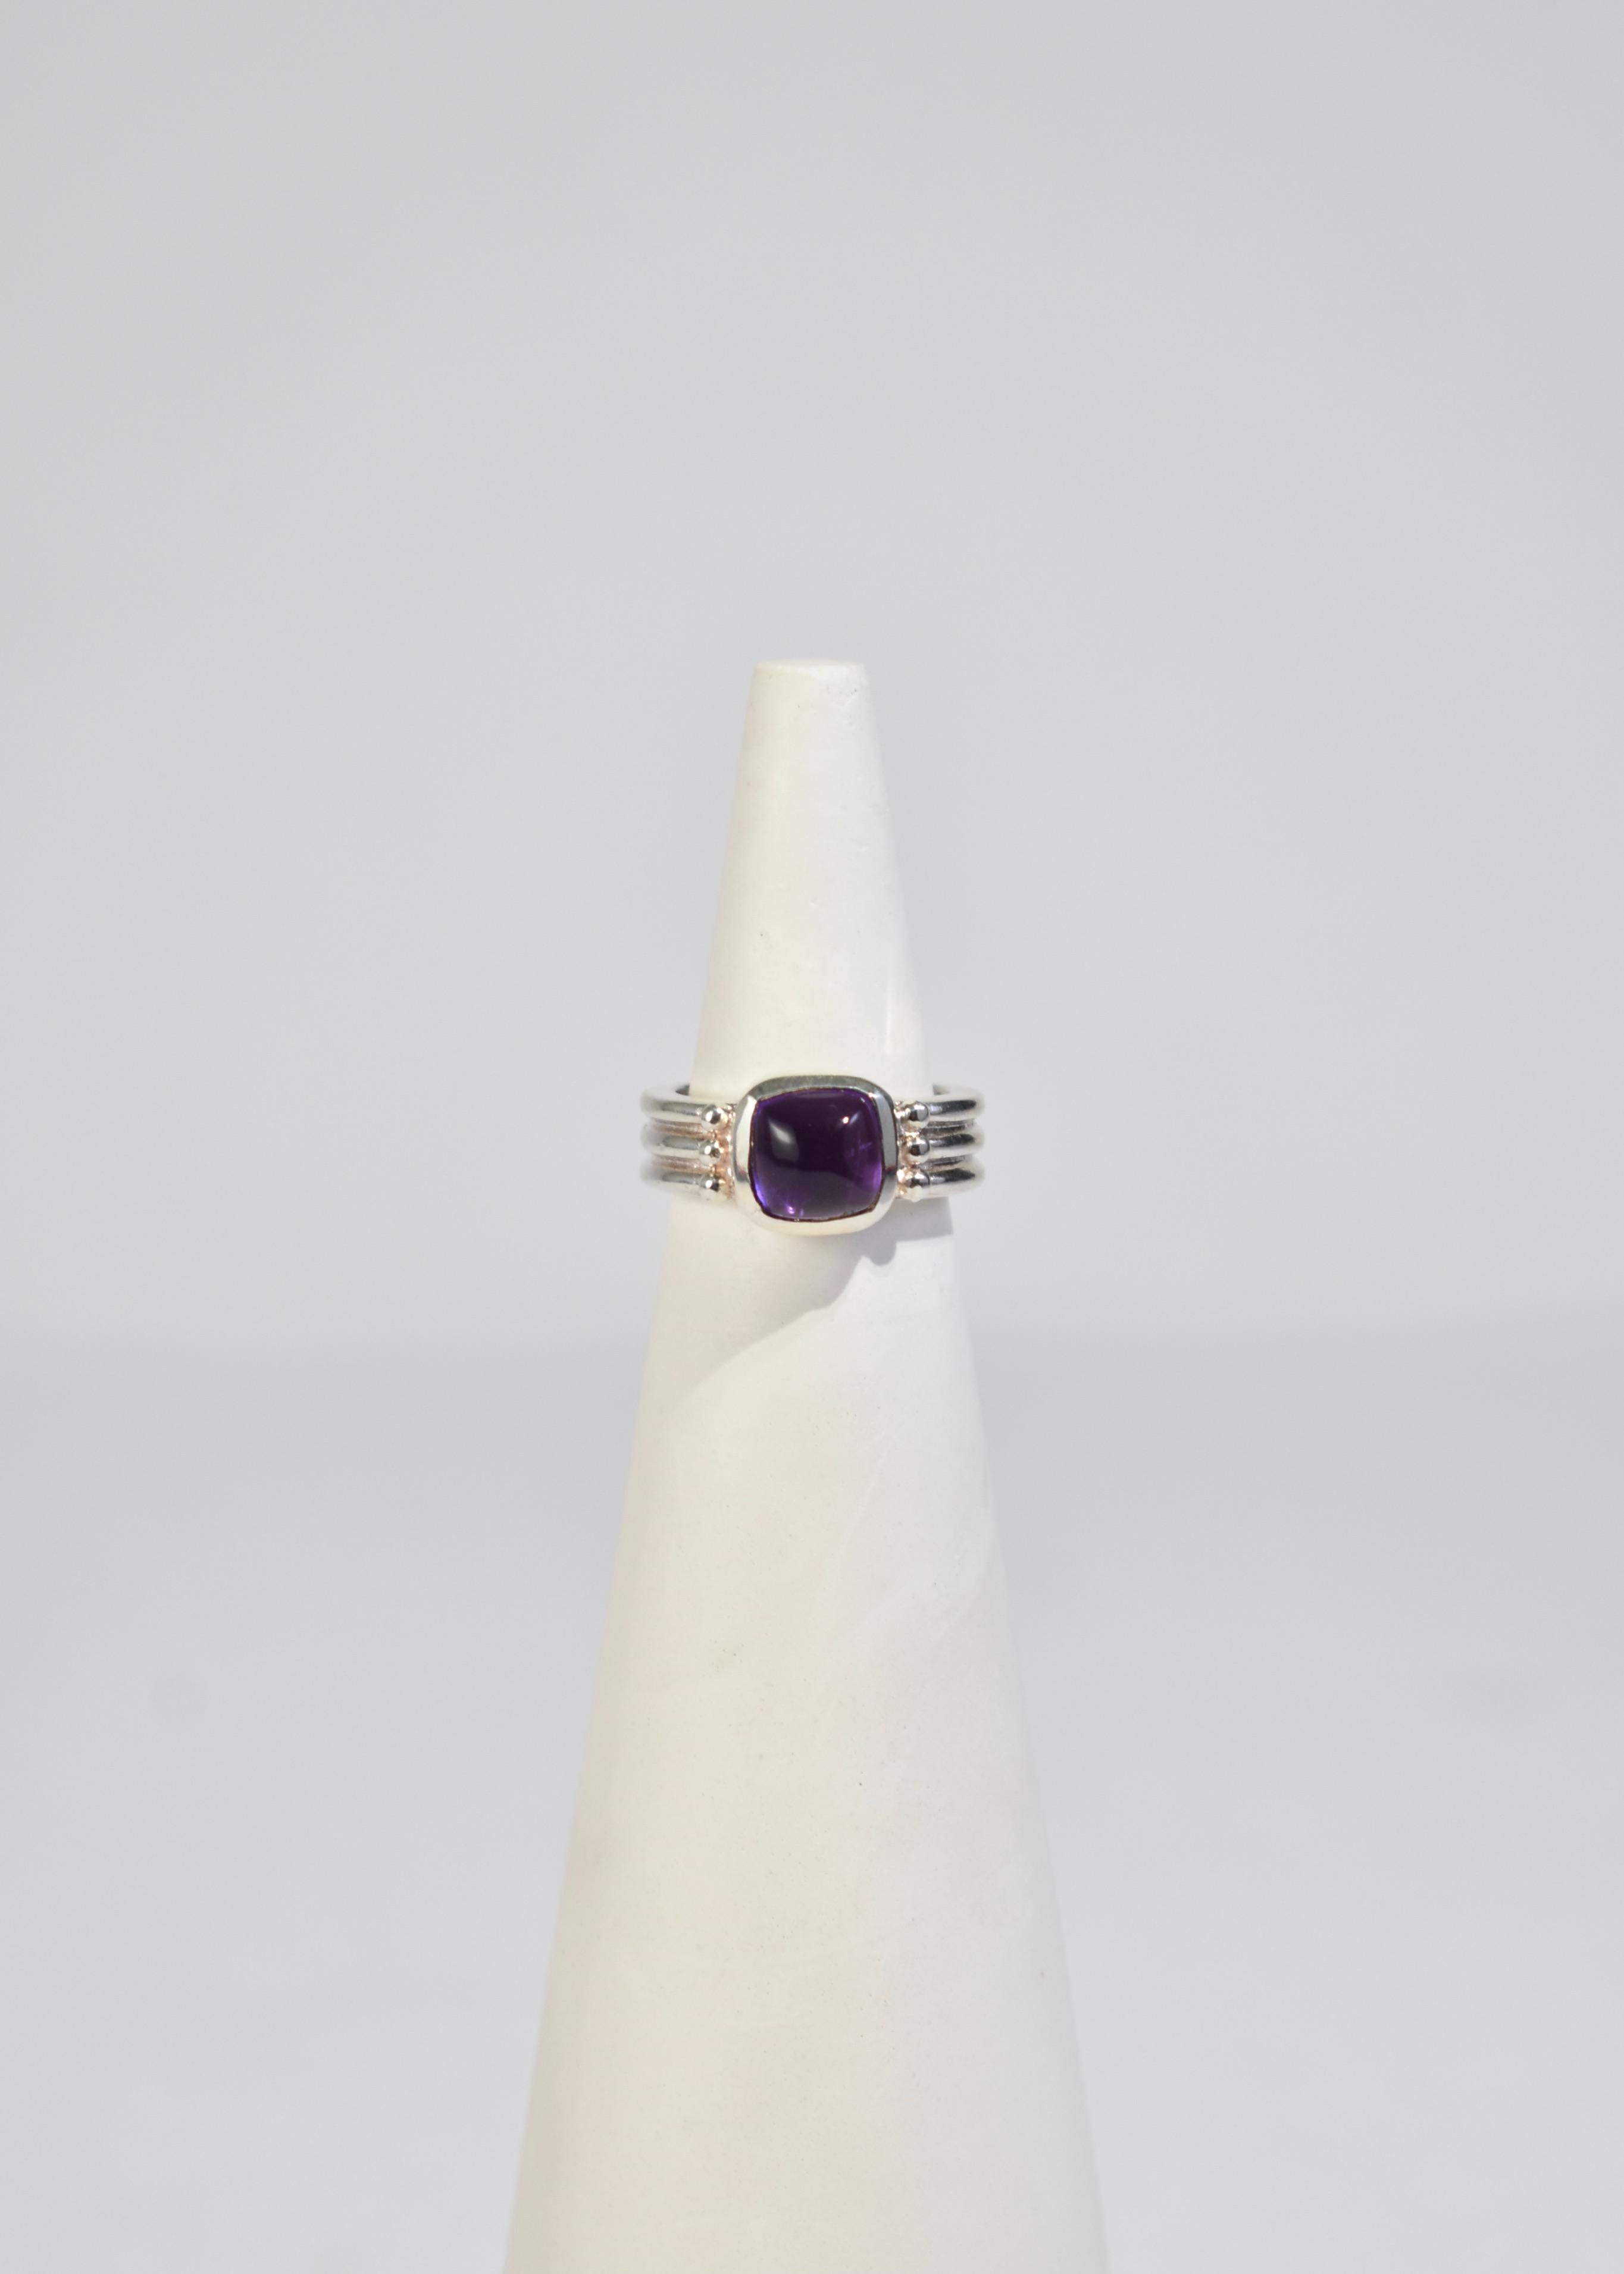 Vintage sterling ring with a polished amethyst cabochon and ribbed detail, stamped 925.

Material: Sterling silver, amethyst. 